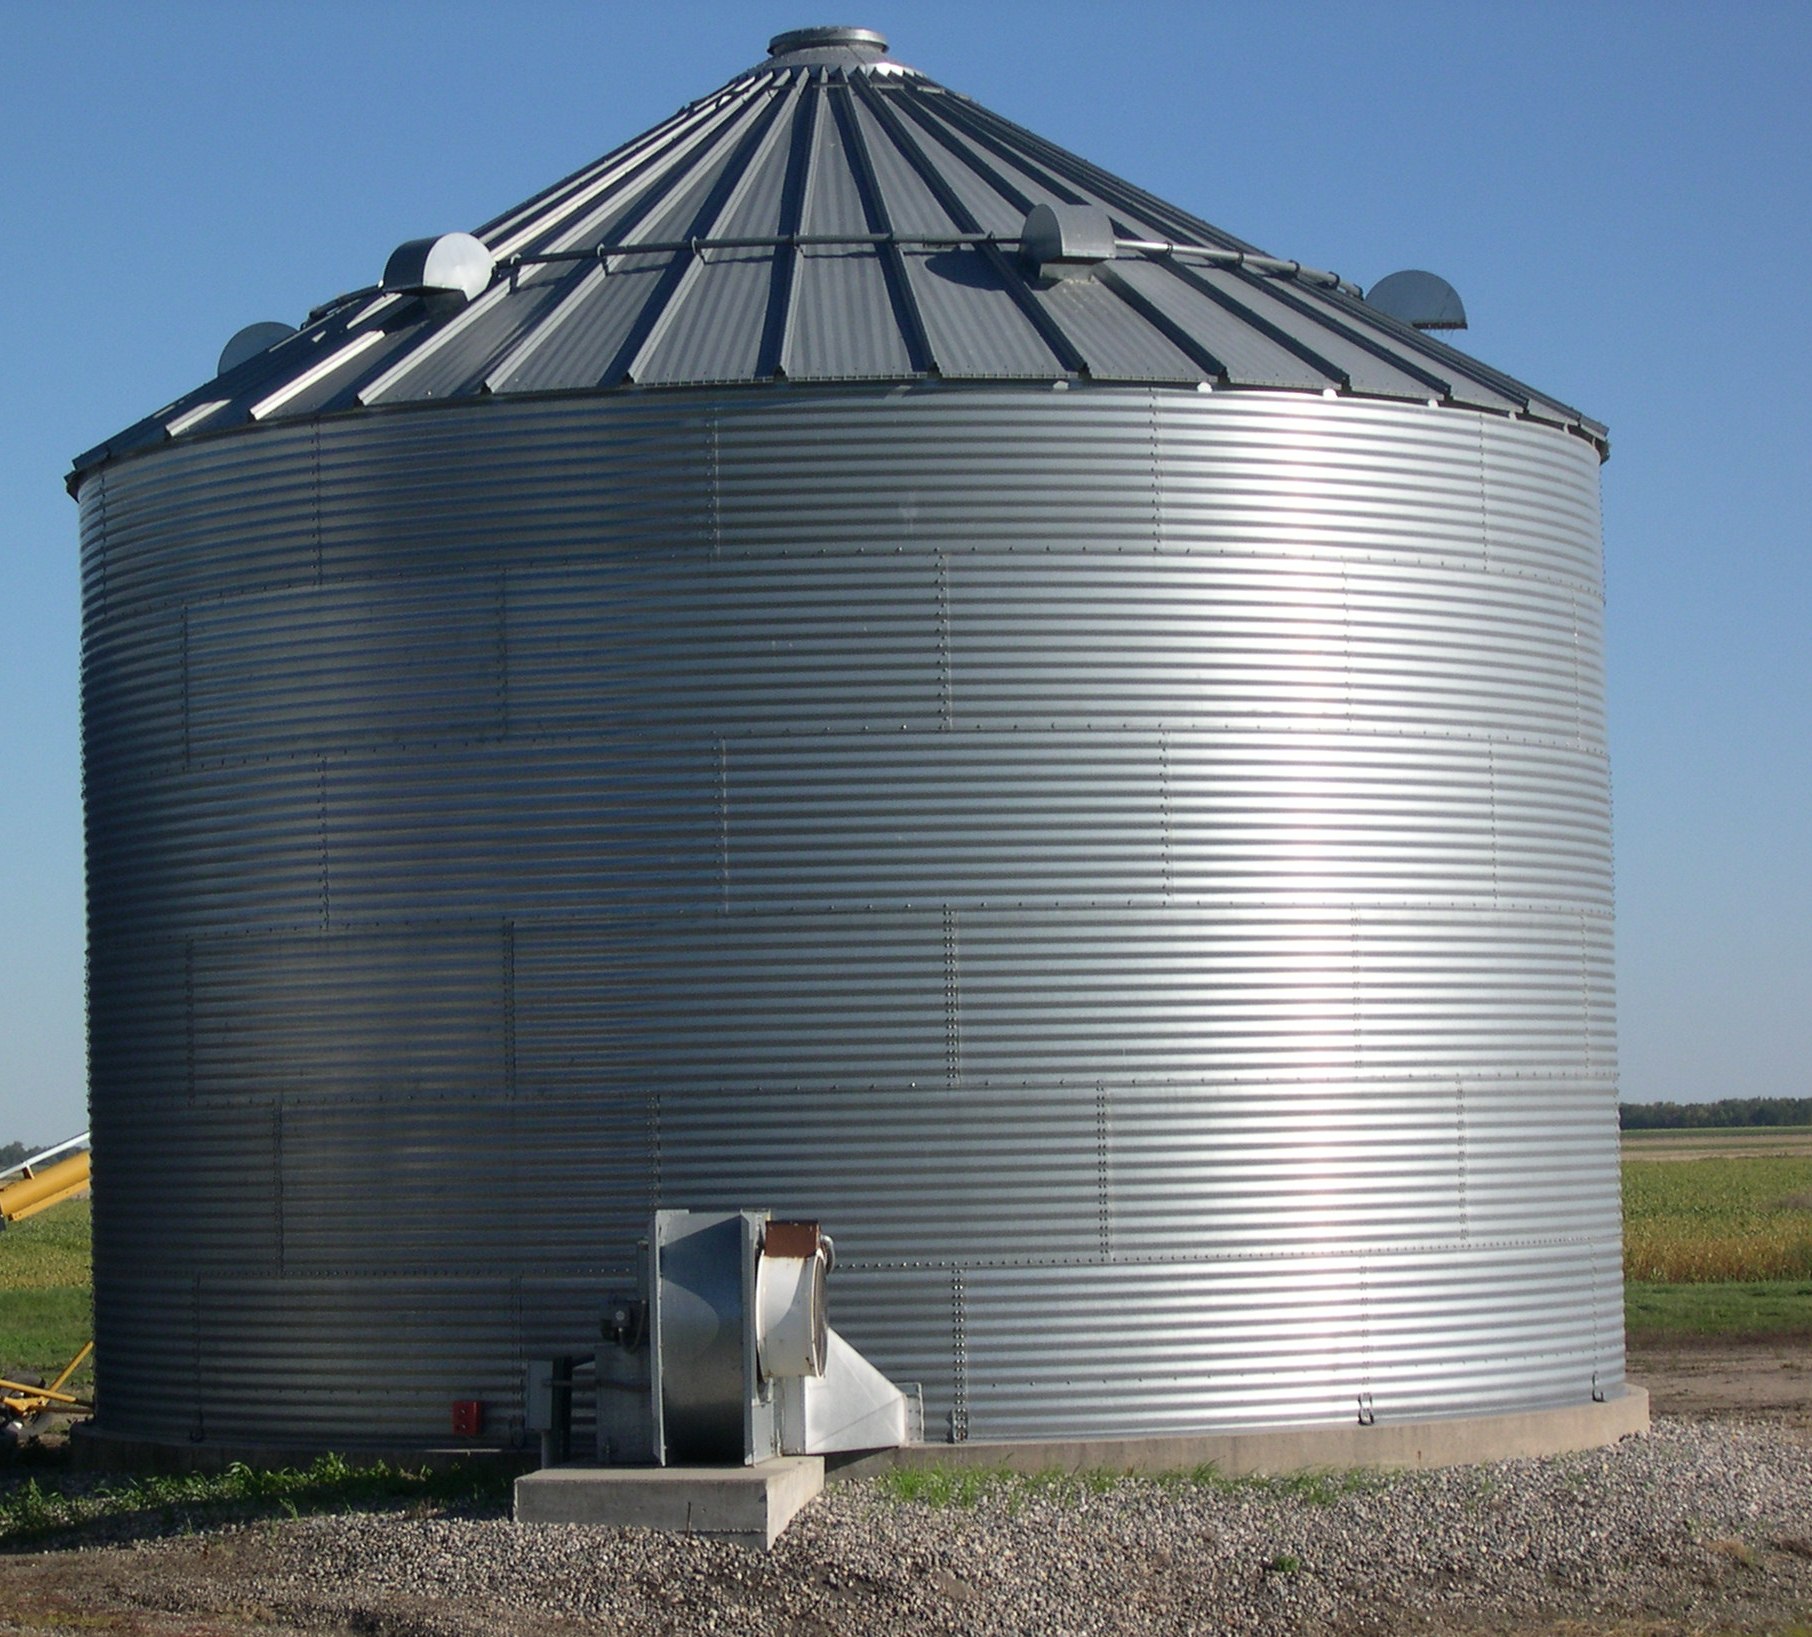 Grain handling experts will address pressing issues for this spring and summer during the webinar. (NDSU photo)